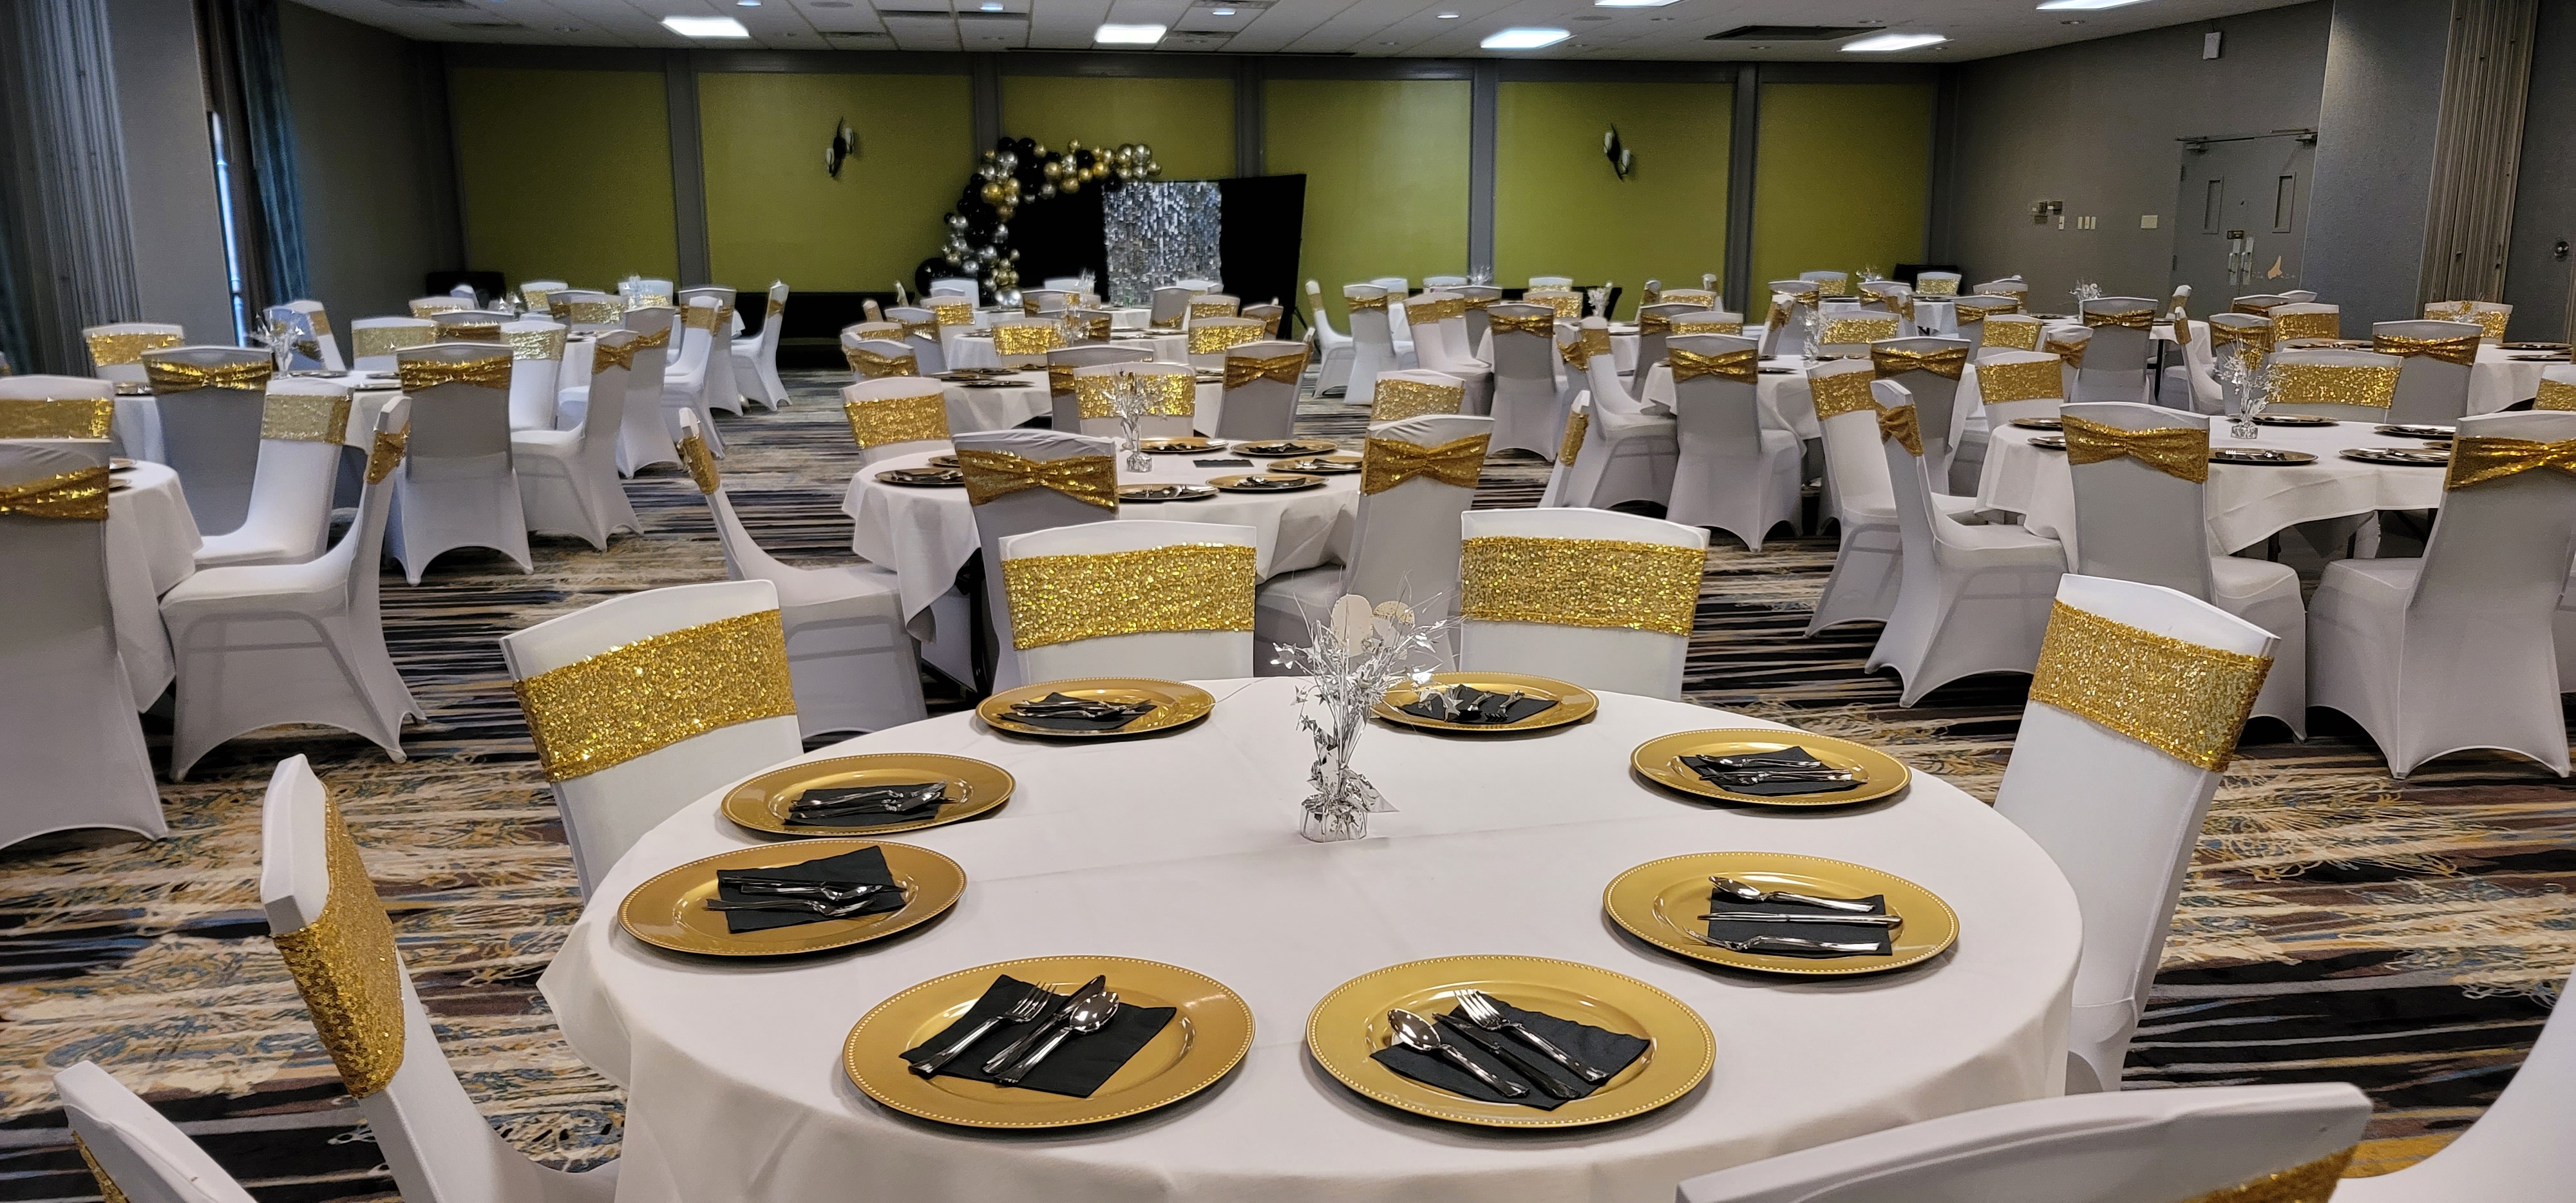 large meeting room with gold accents and round tables